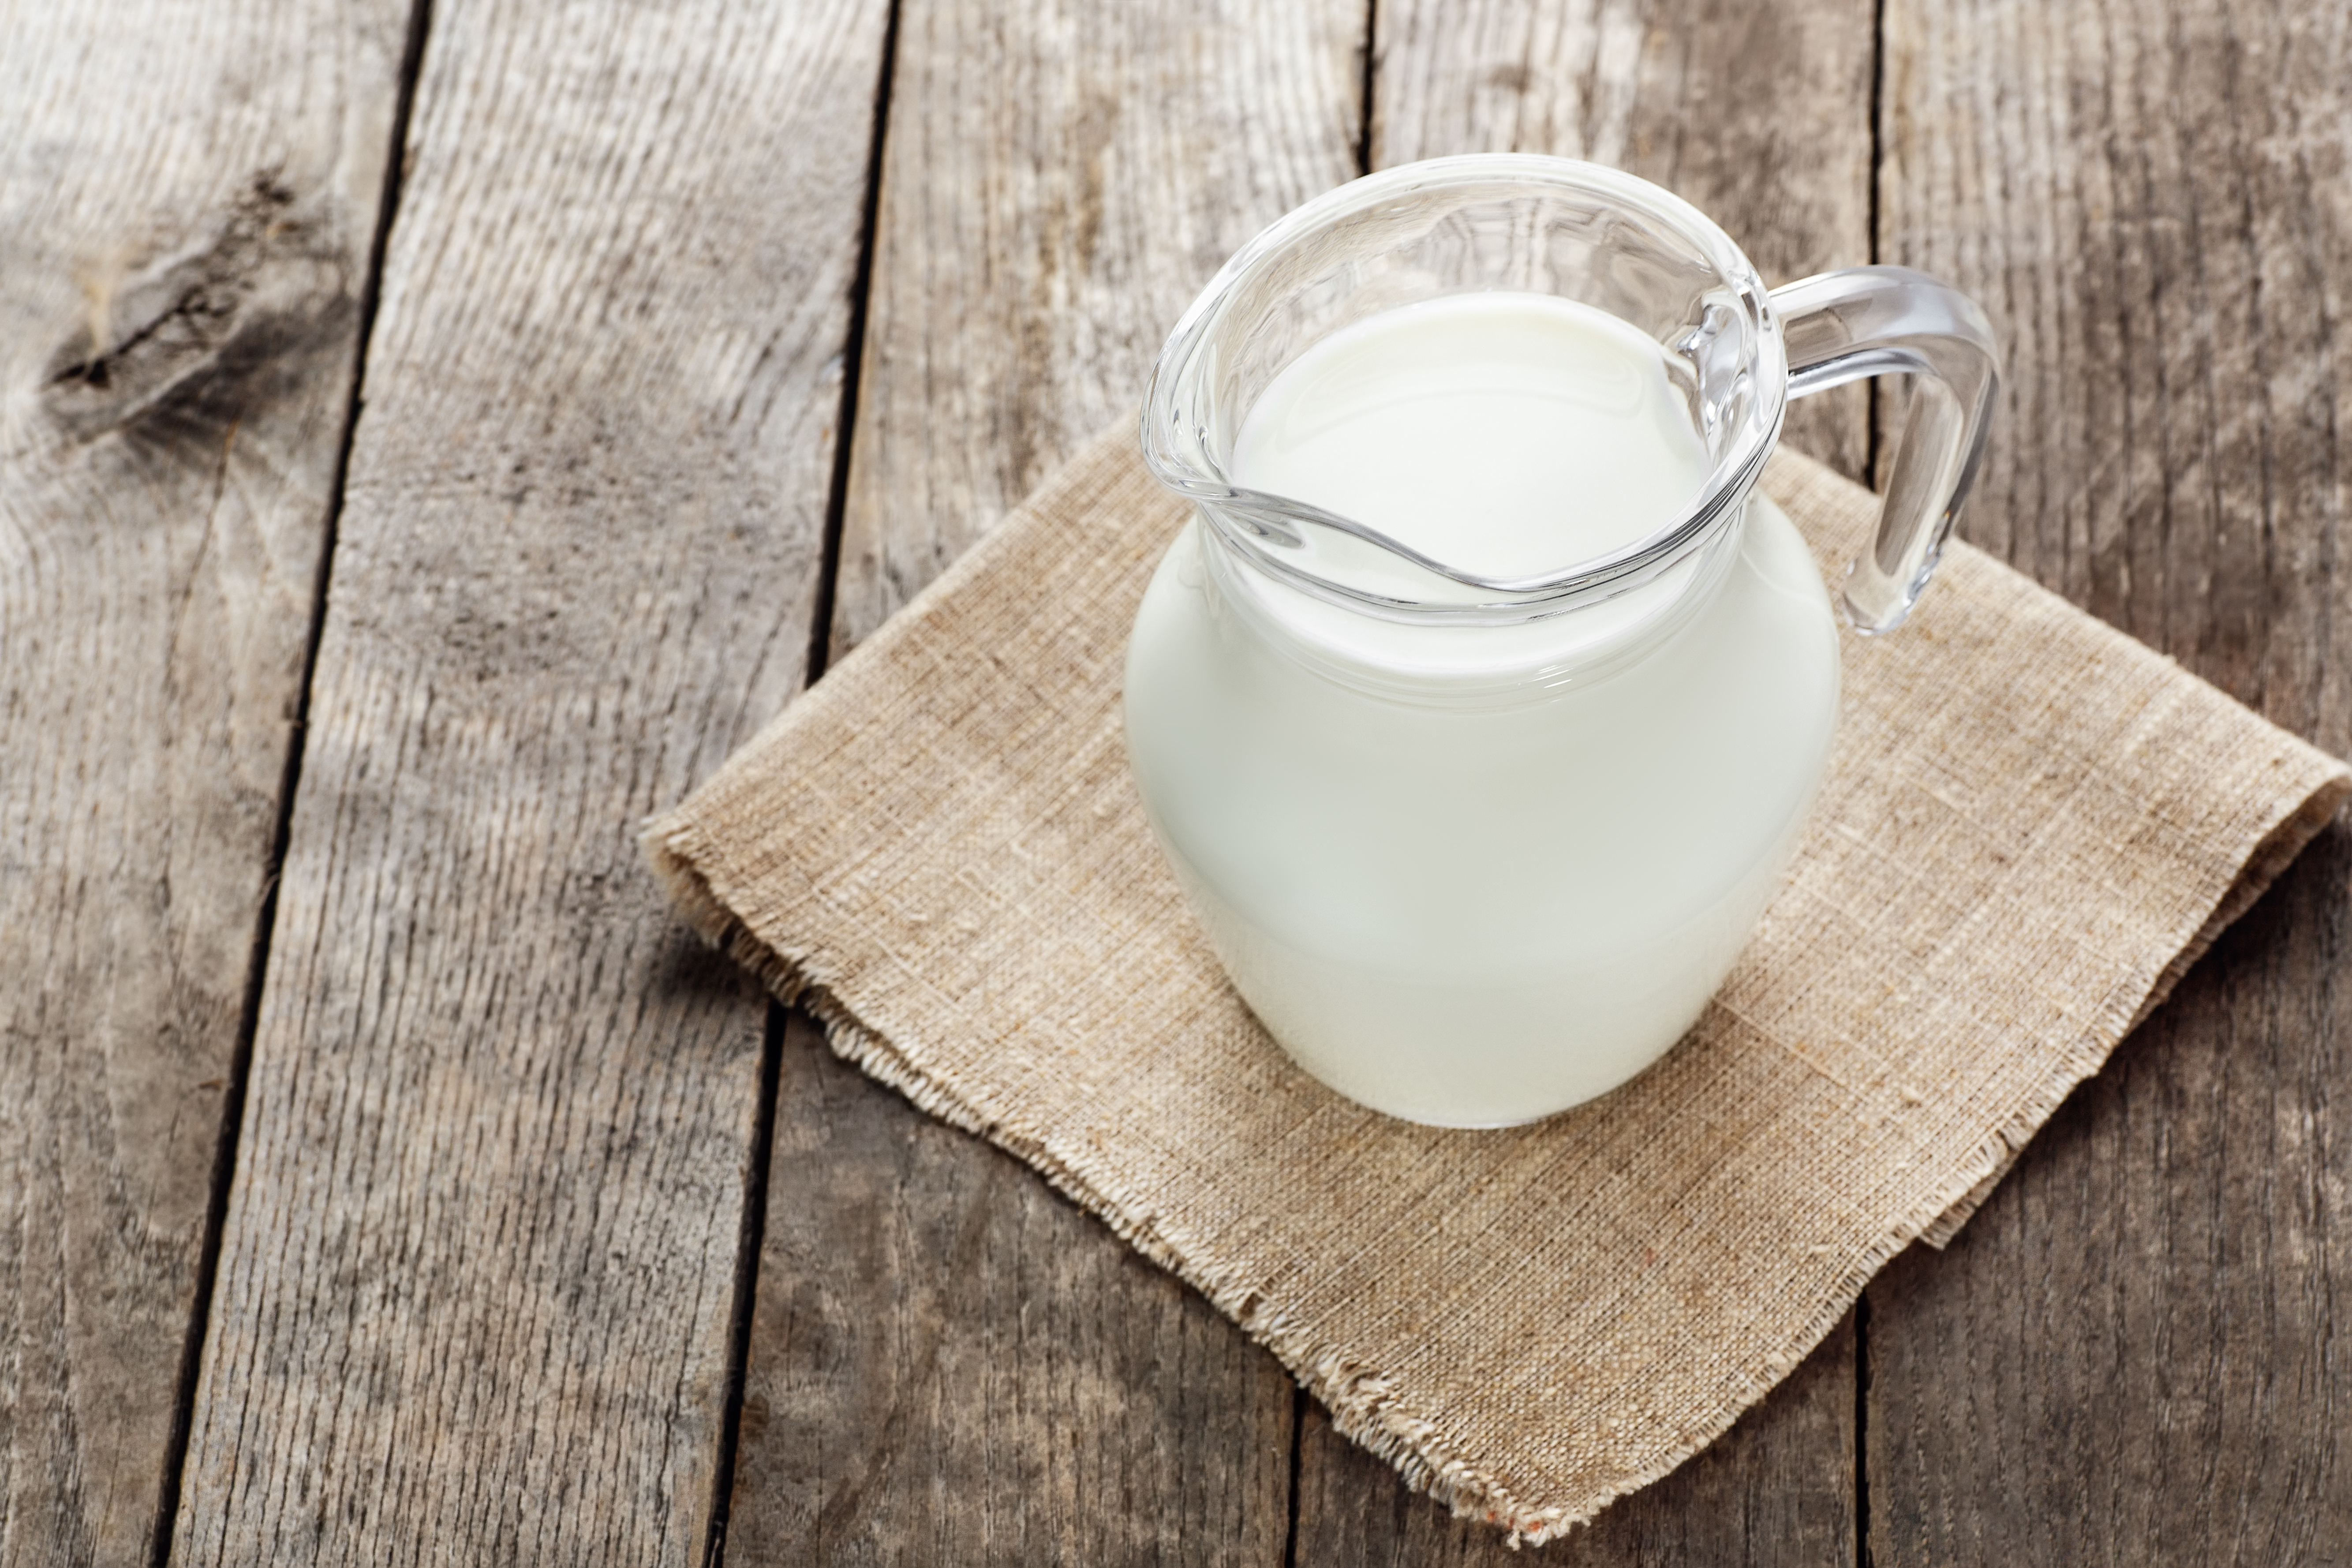 What Is the Difference Between Skim Milk and Fat-Free Milk?